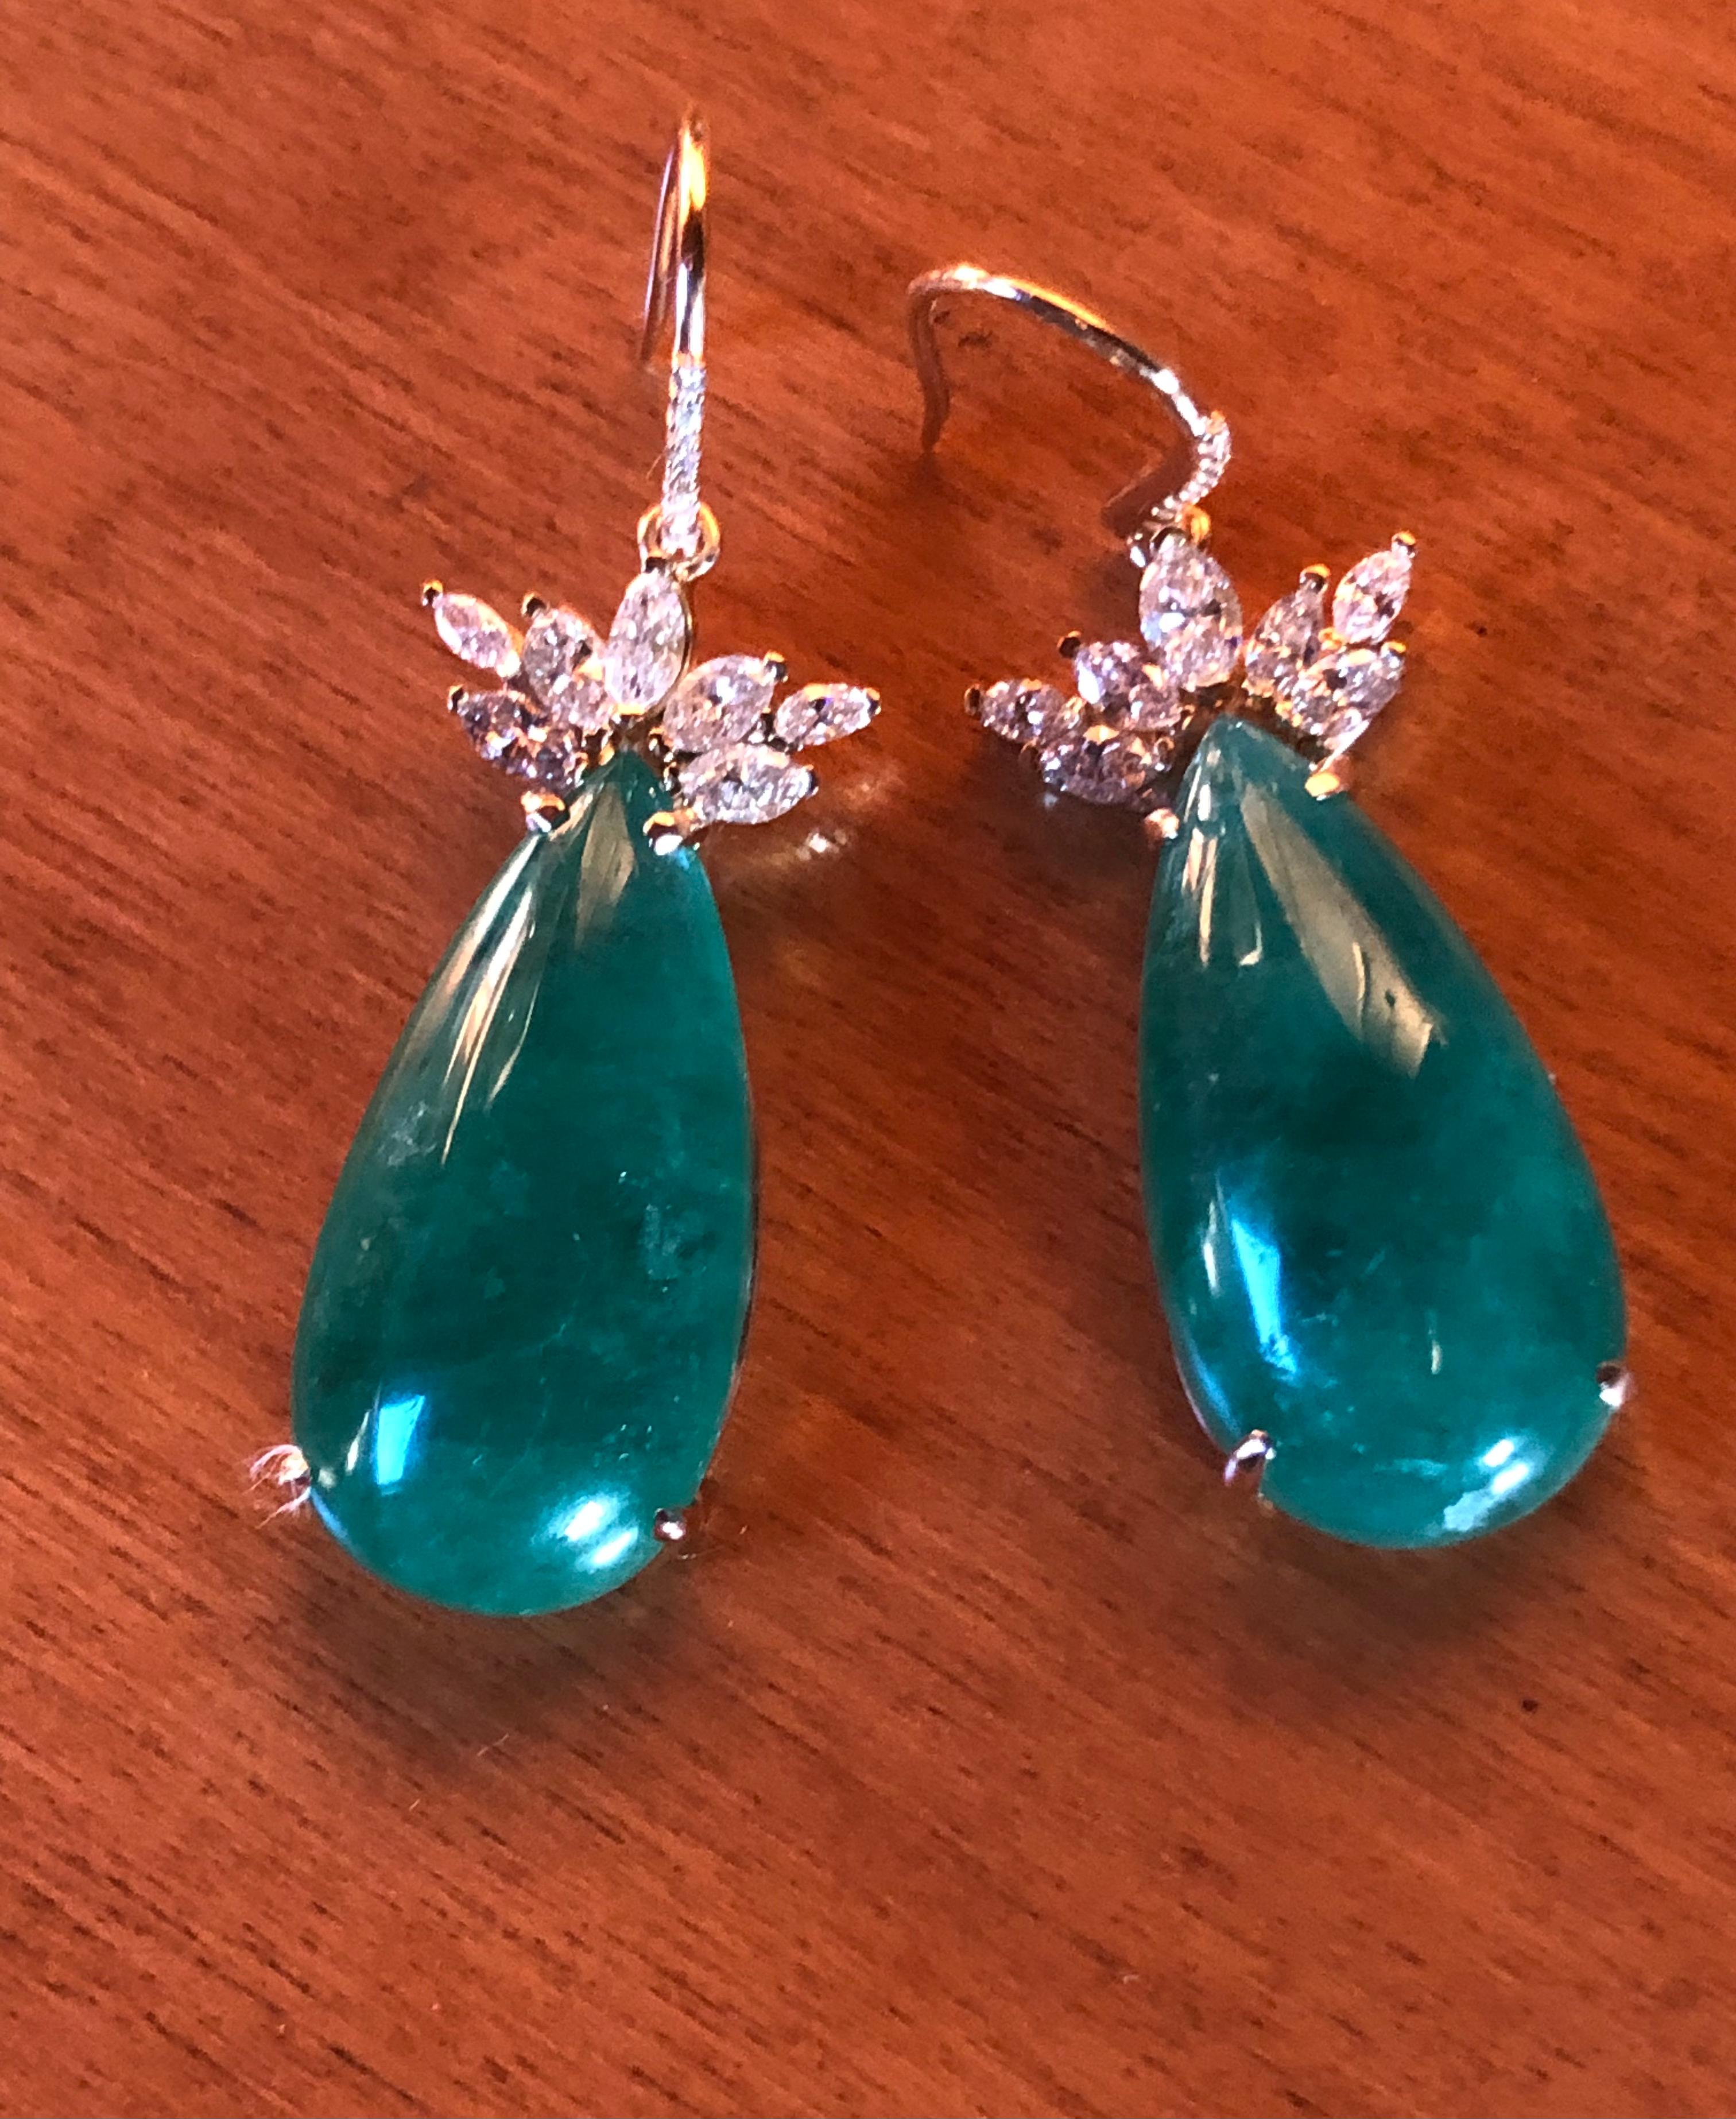 Emeralds Maravellous  56.27 Carats Diamond, Pear-Shaped Cabochon Natural Colombian Emerald Drop Earrings
A pair of 18k yellow gold ear dangle, each fitted with bishop diamond 0.12cts hook at the top, set with marquise diamonds and pear-shaped